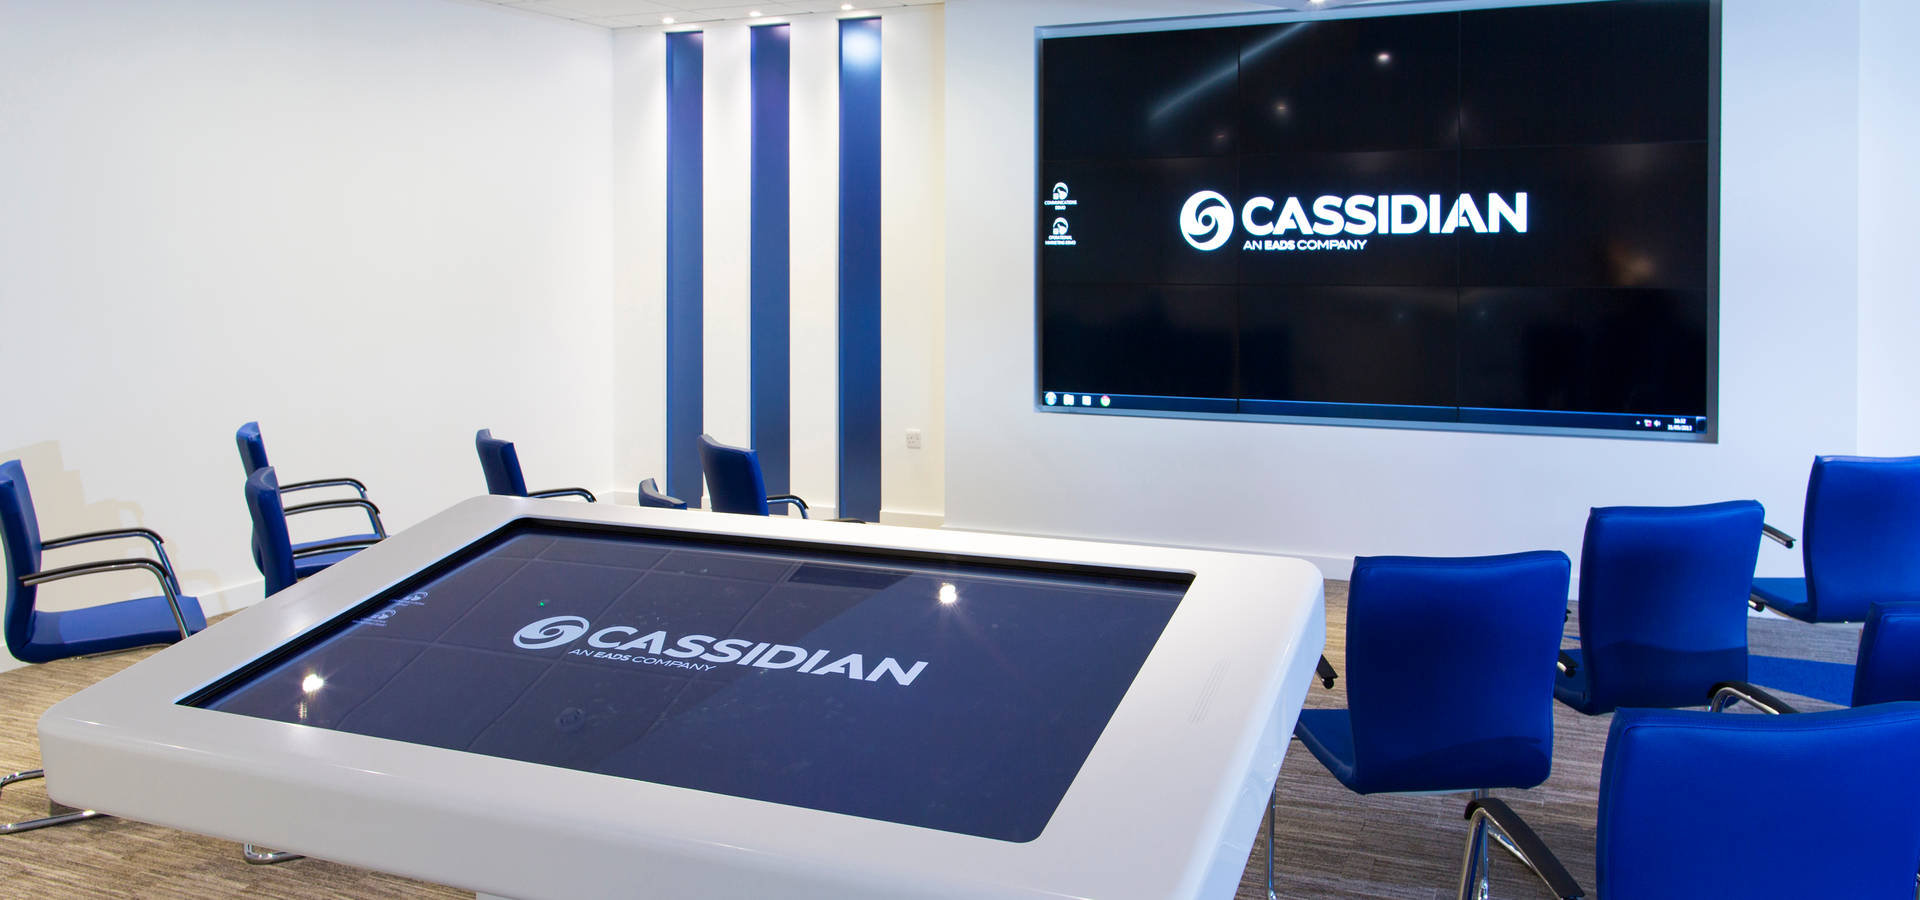 Airbus Customers Experience Centre Formally Cassidian Von